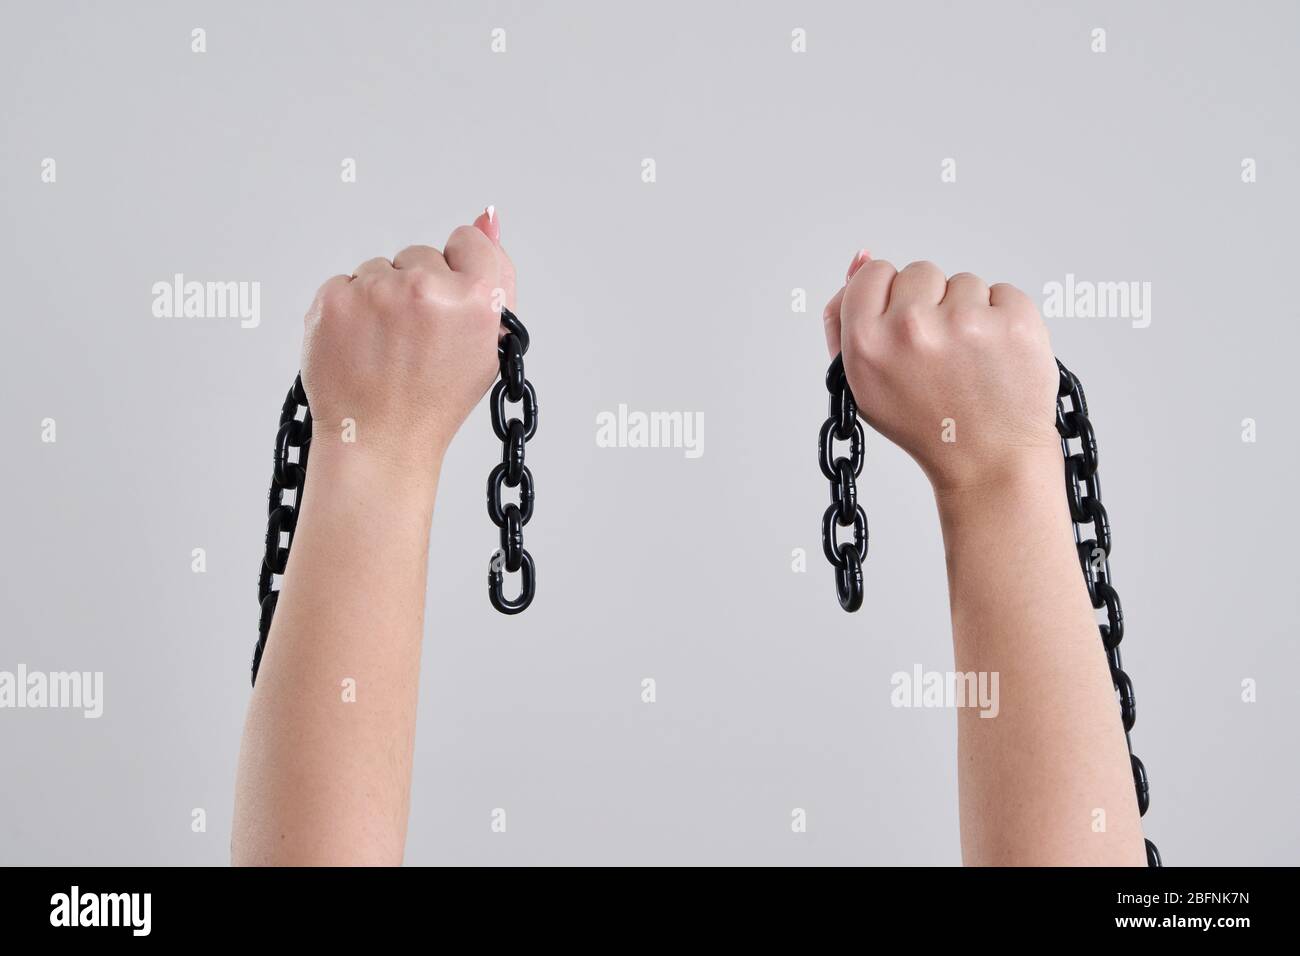 Female hands holding a broken metal chain over grey background with copy space Stock Photo